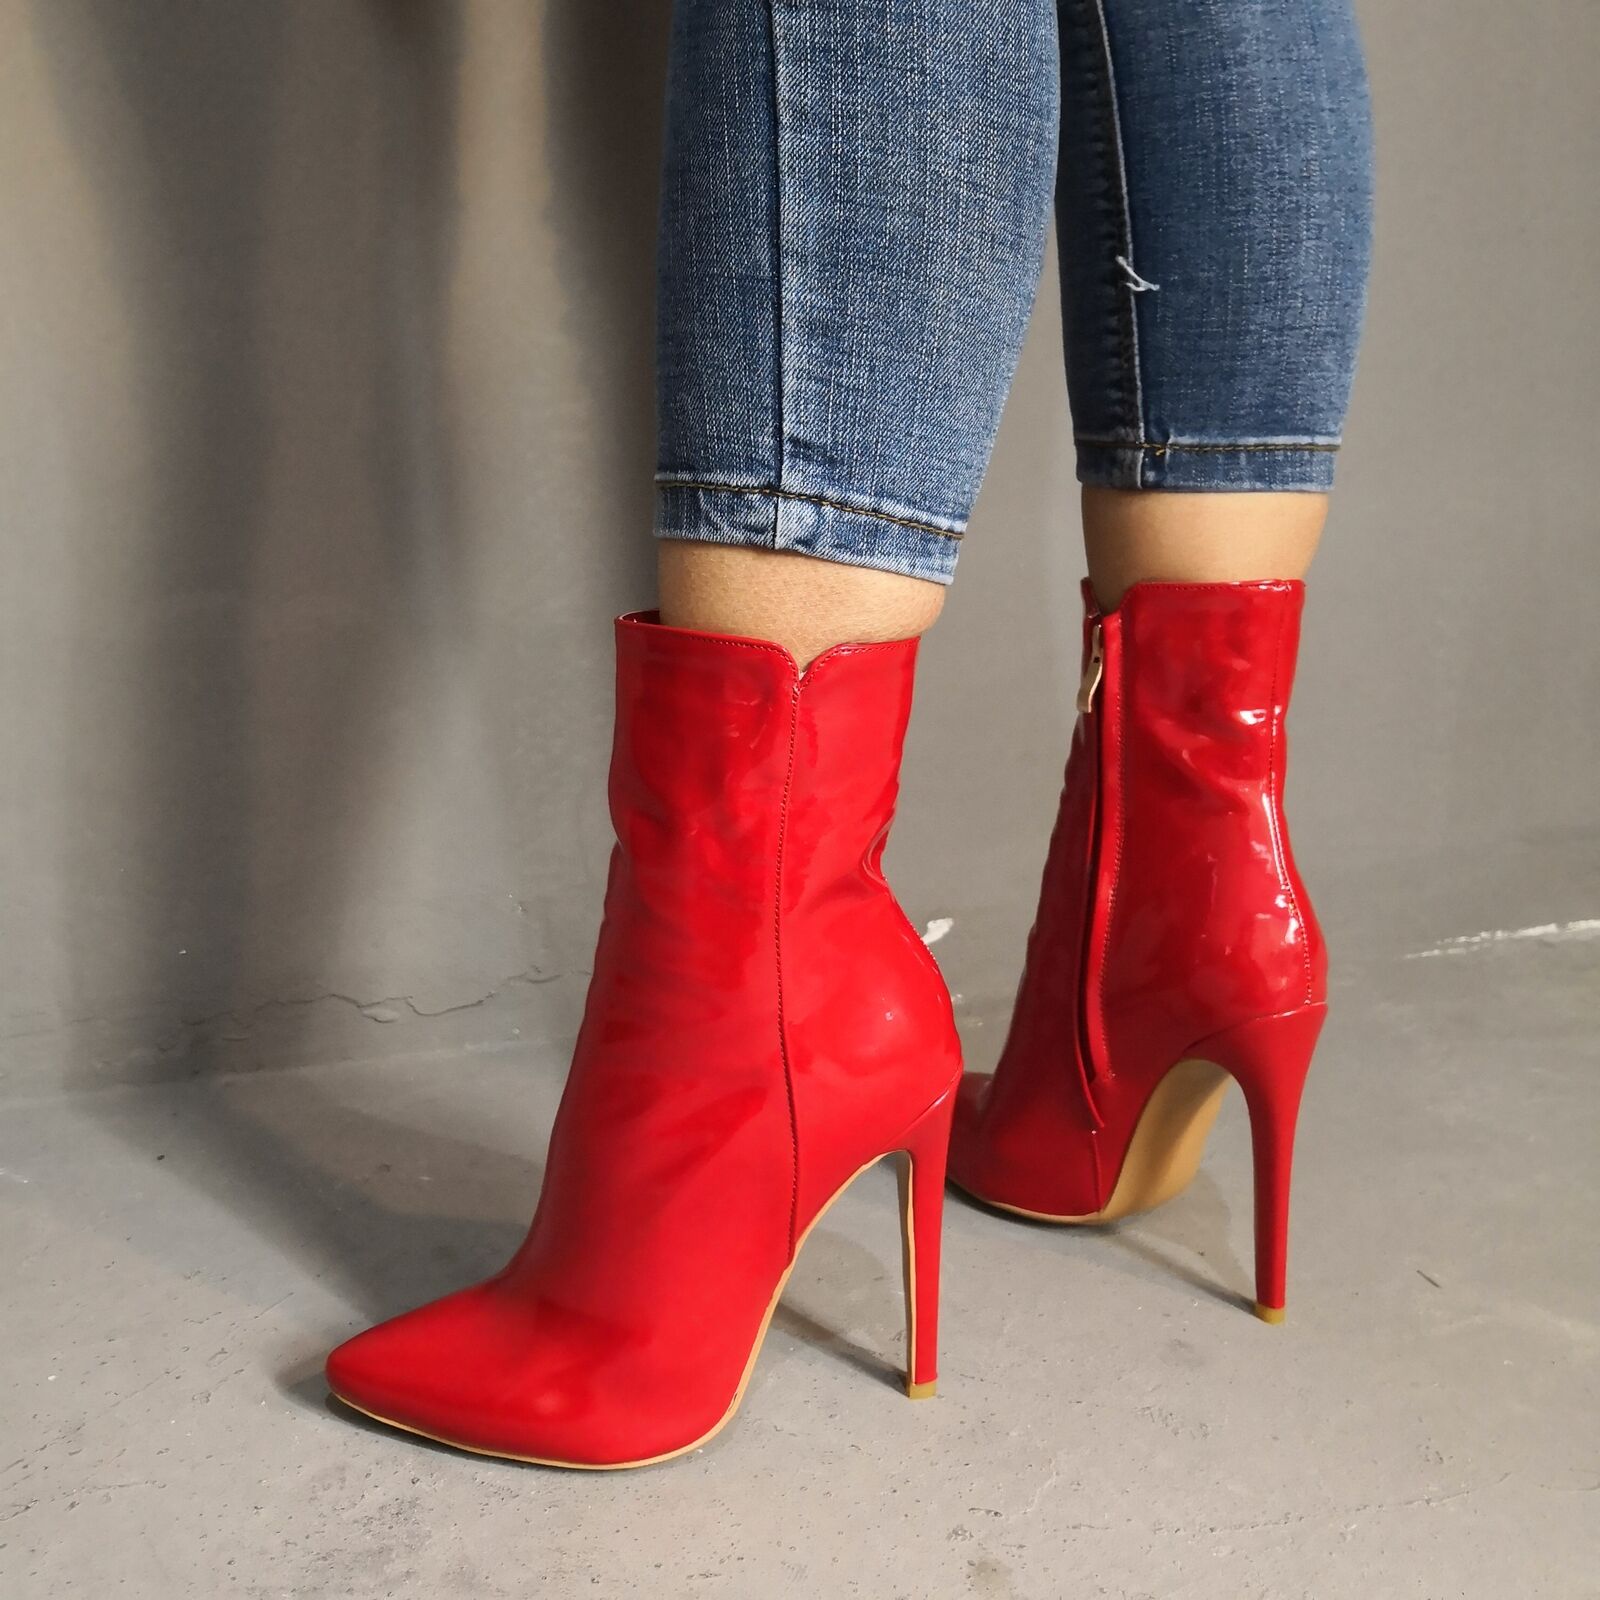 Sprede Multiplikation deadlock Clubwear Women Red Sexy Pointed Toe Patent Leather Stilettos Ankle Boots  Shoes | eBay